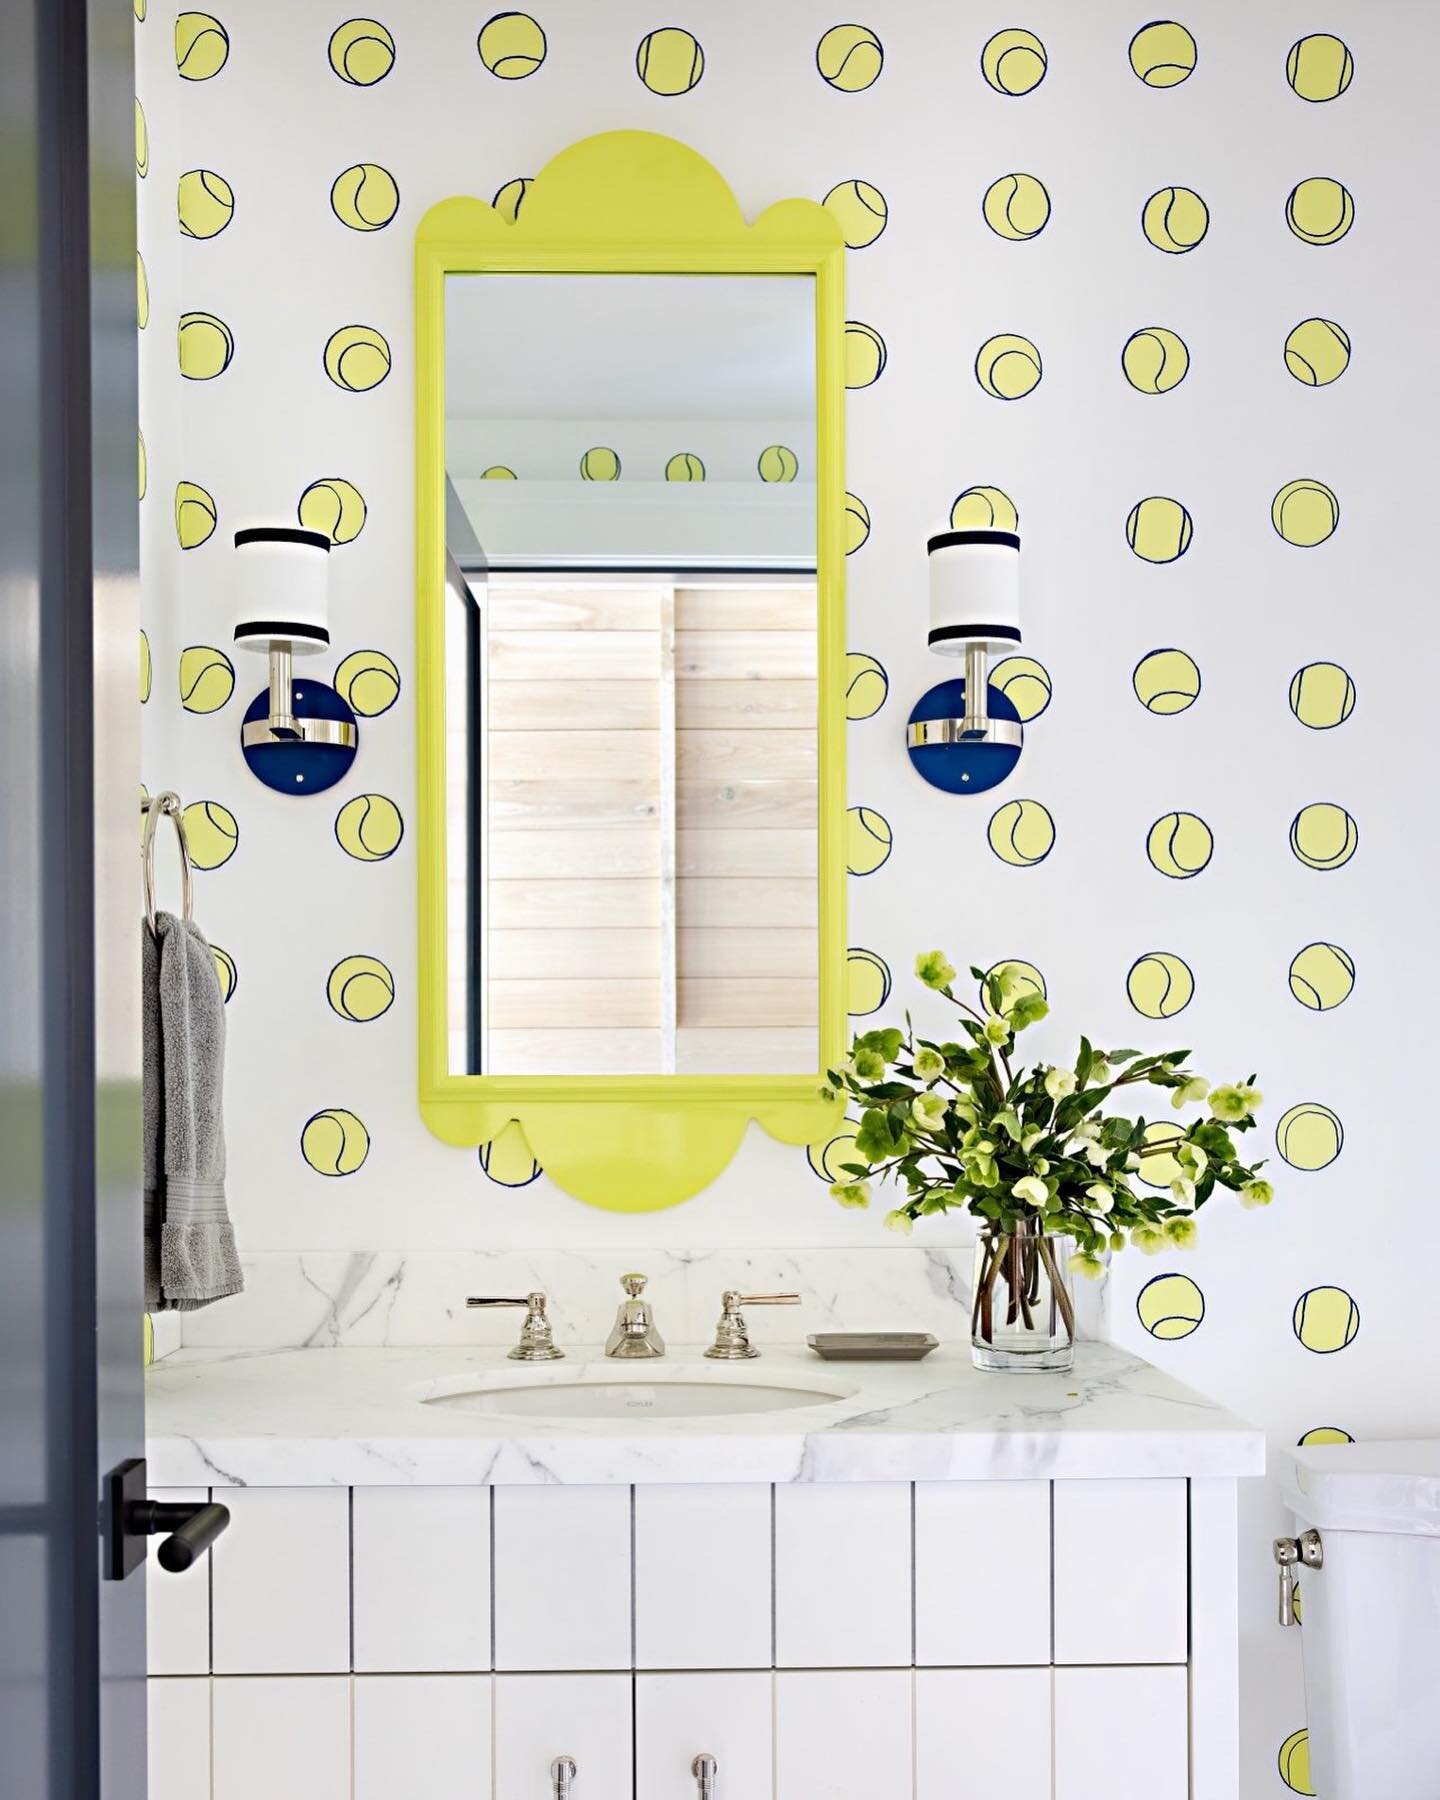 Tennis anyone?  Our San Juan Party Barn Powder Room is ready to play 

Photo by @karynmillet